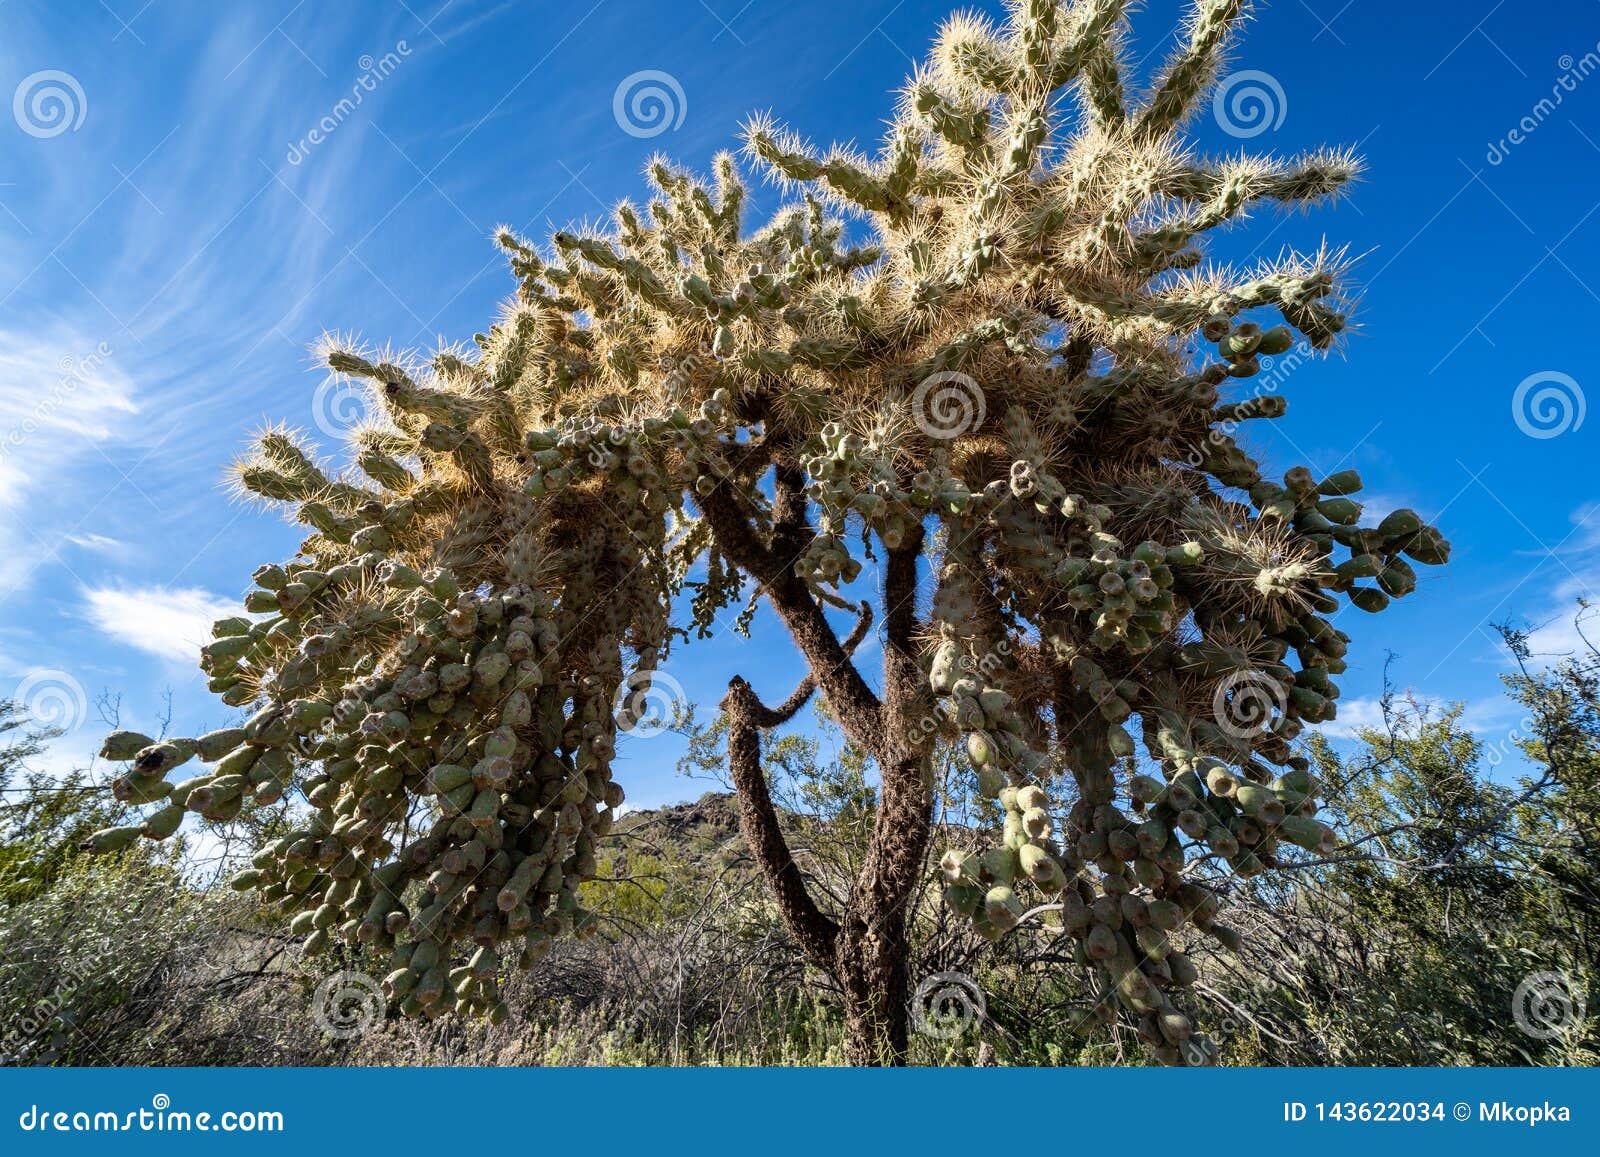 a chainfruit cholla cactus in organ pipe national monument in the sonoran desert of arizona